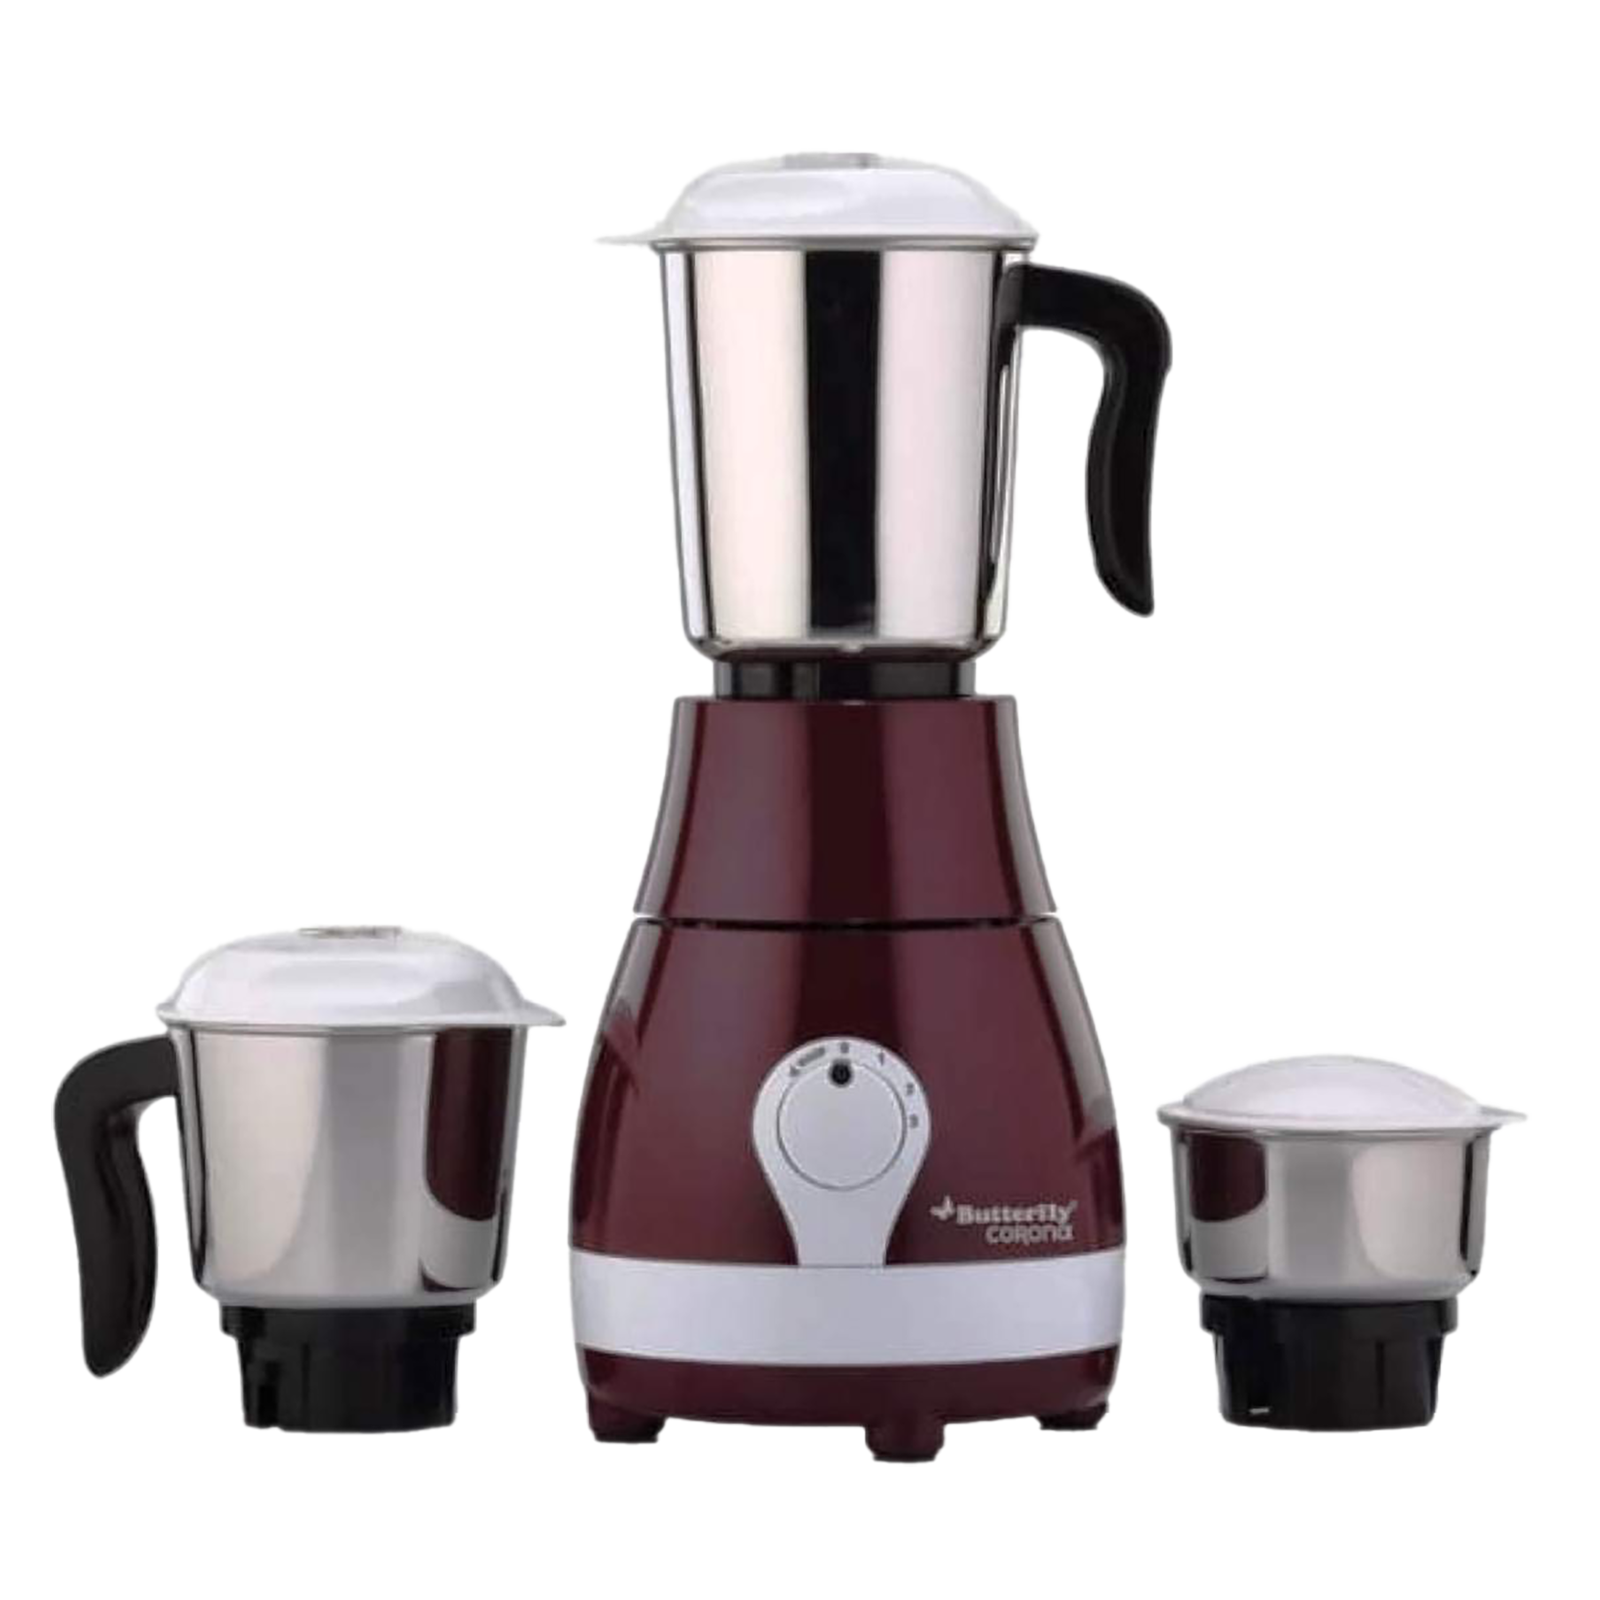 Butterfly 750 W Mixer Grinder with 3 Jar (Corona Plus, Cherry Red)_1